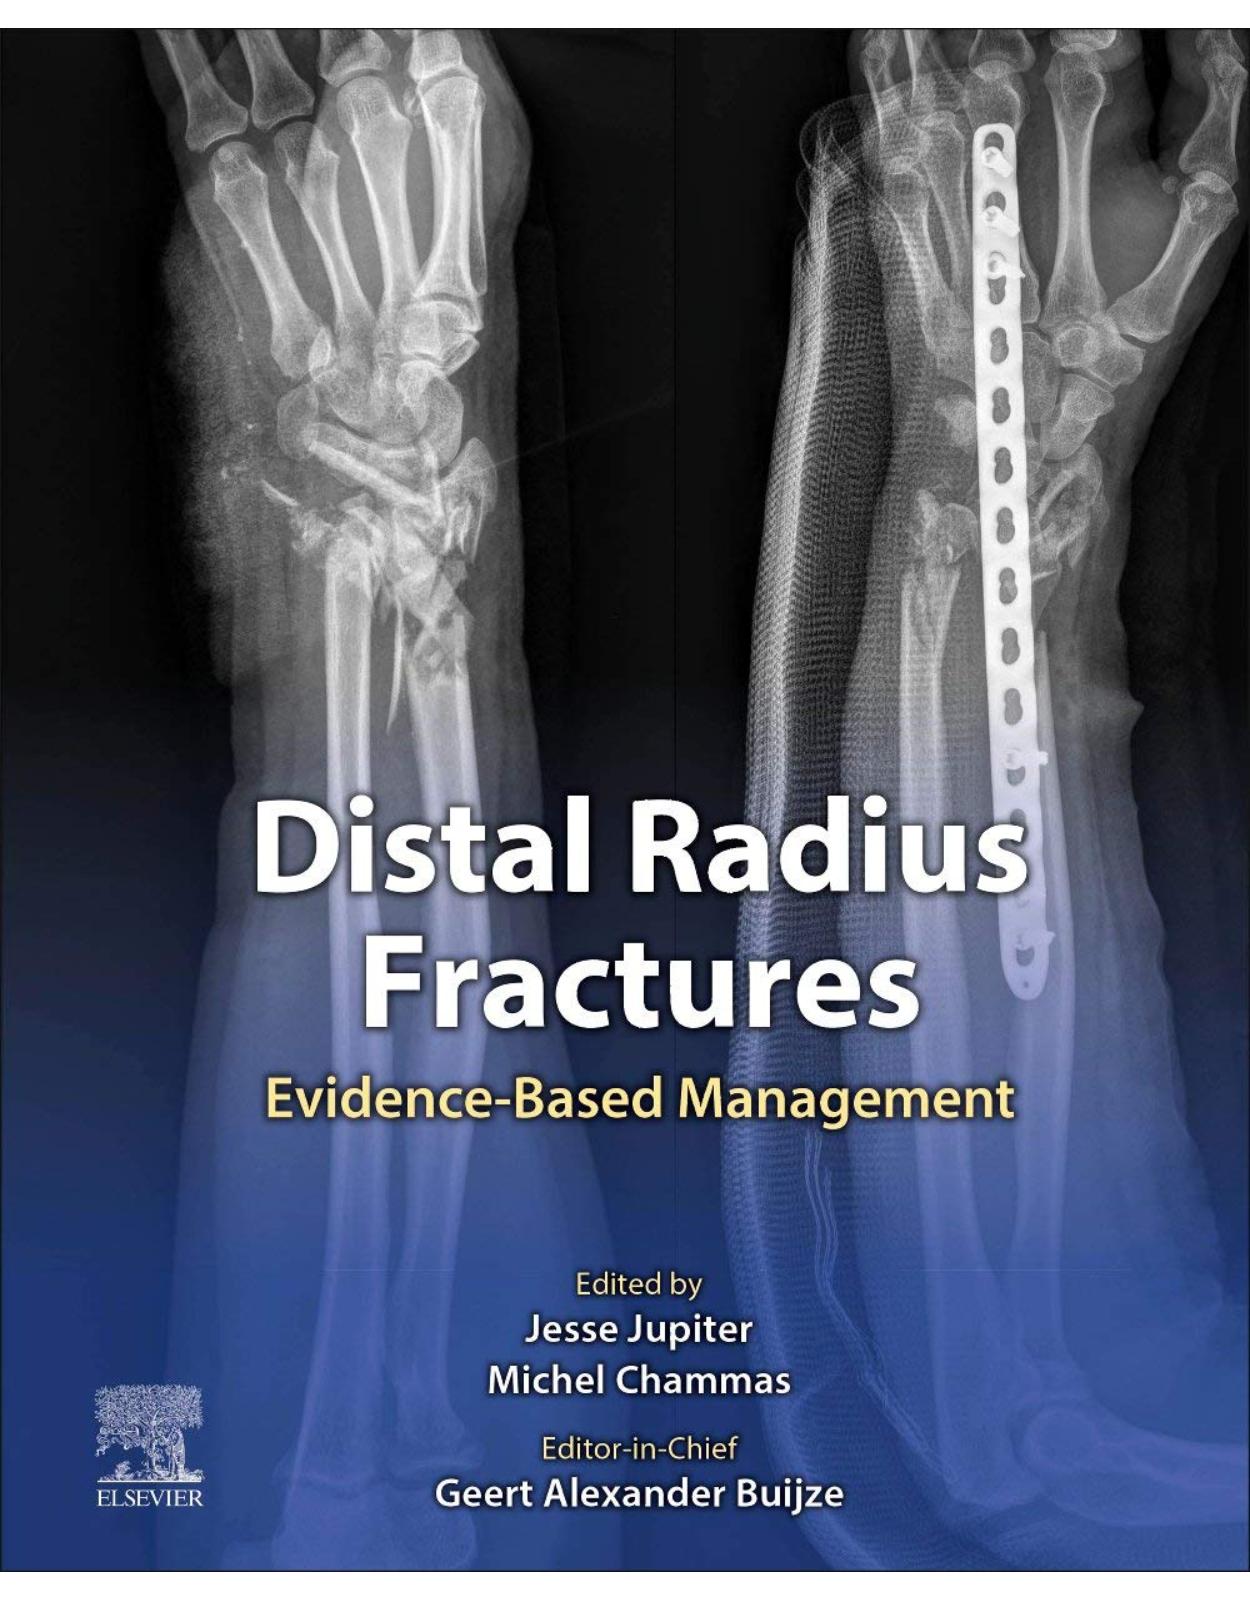 Distal Radius Fractures: Evidence-Based Management